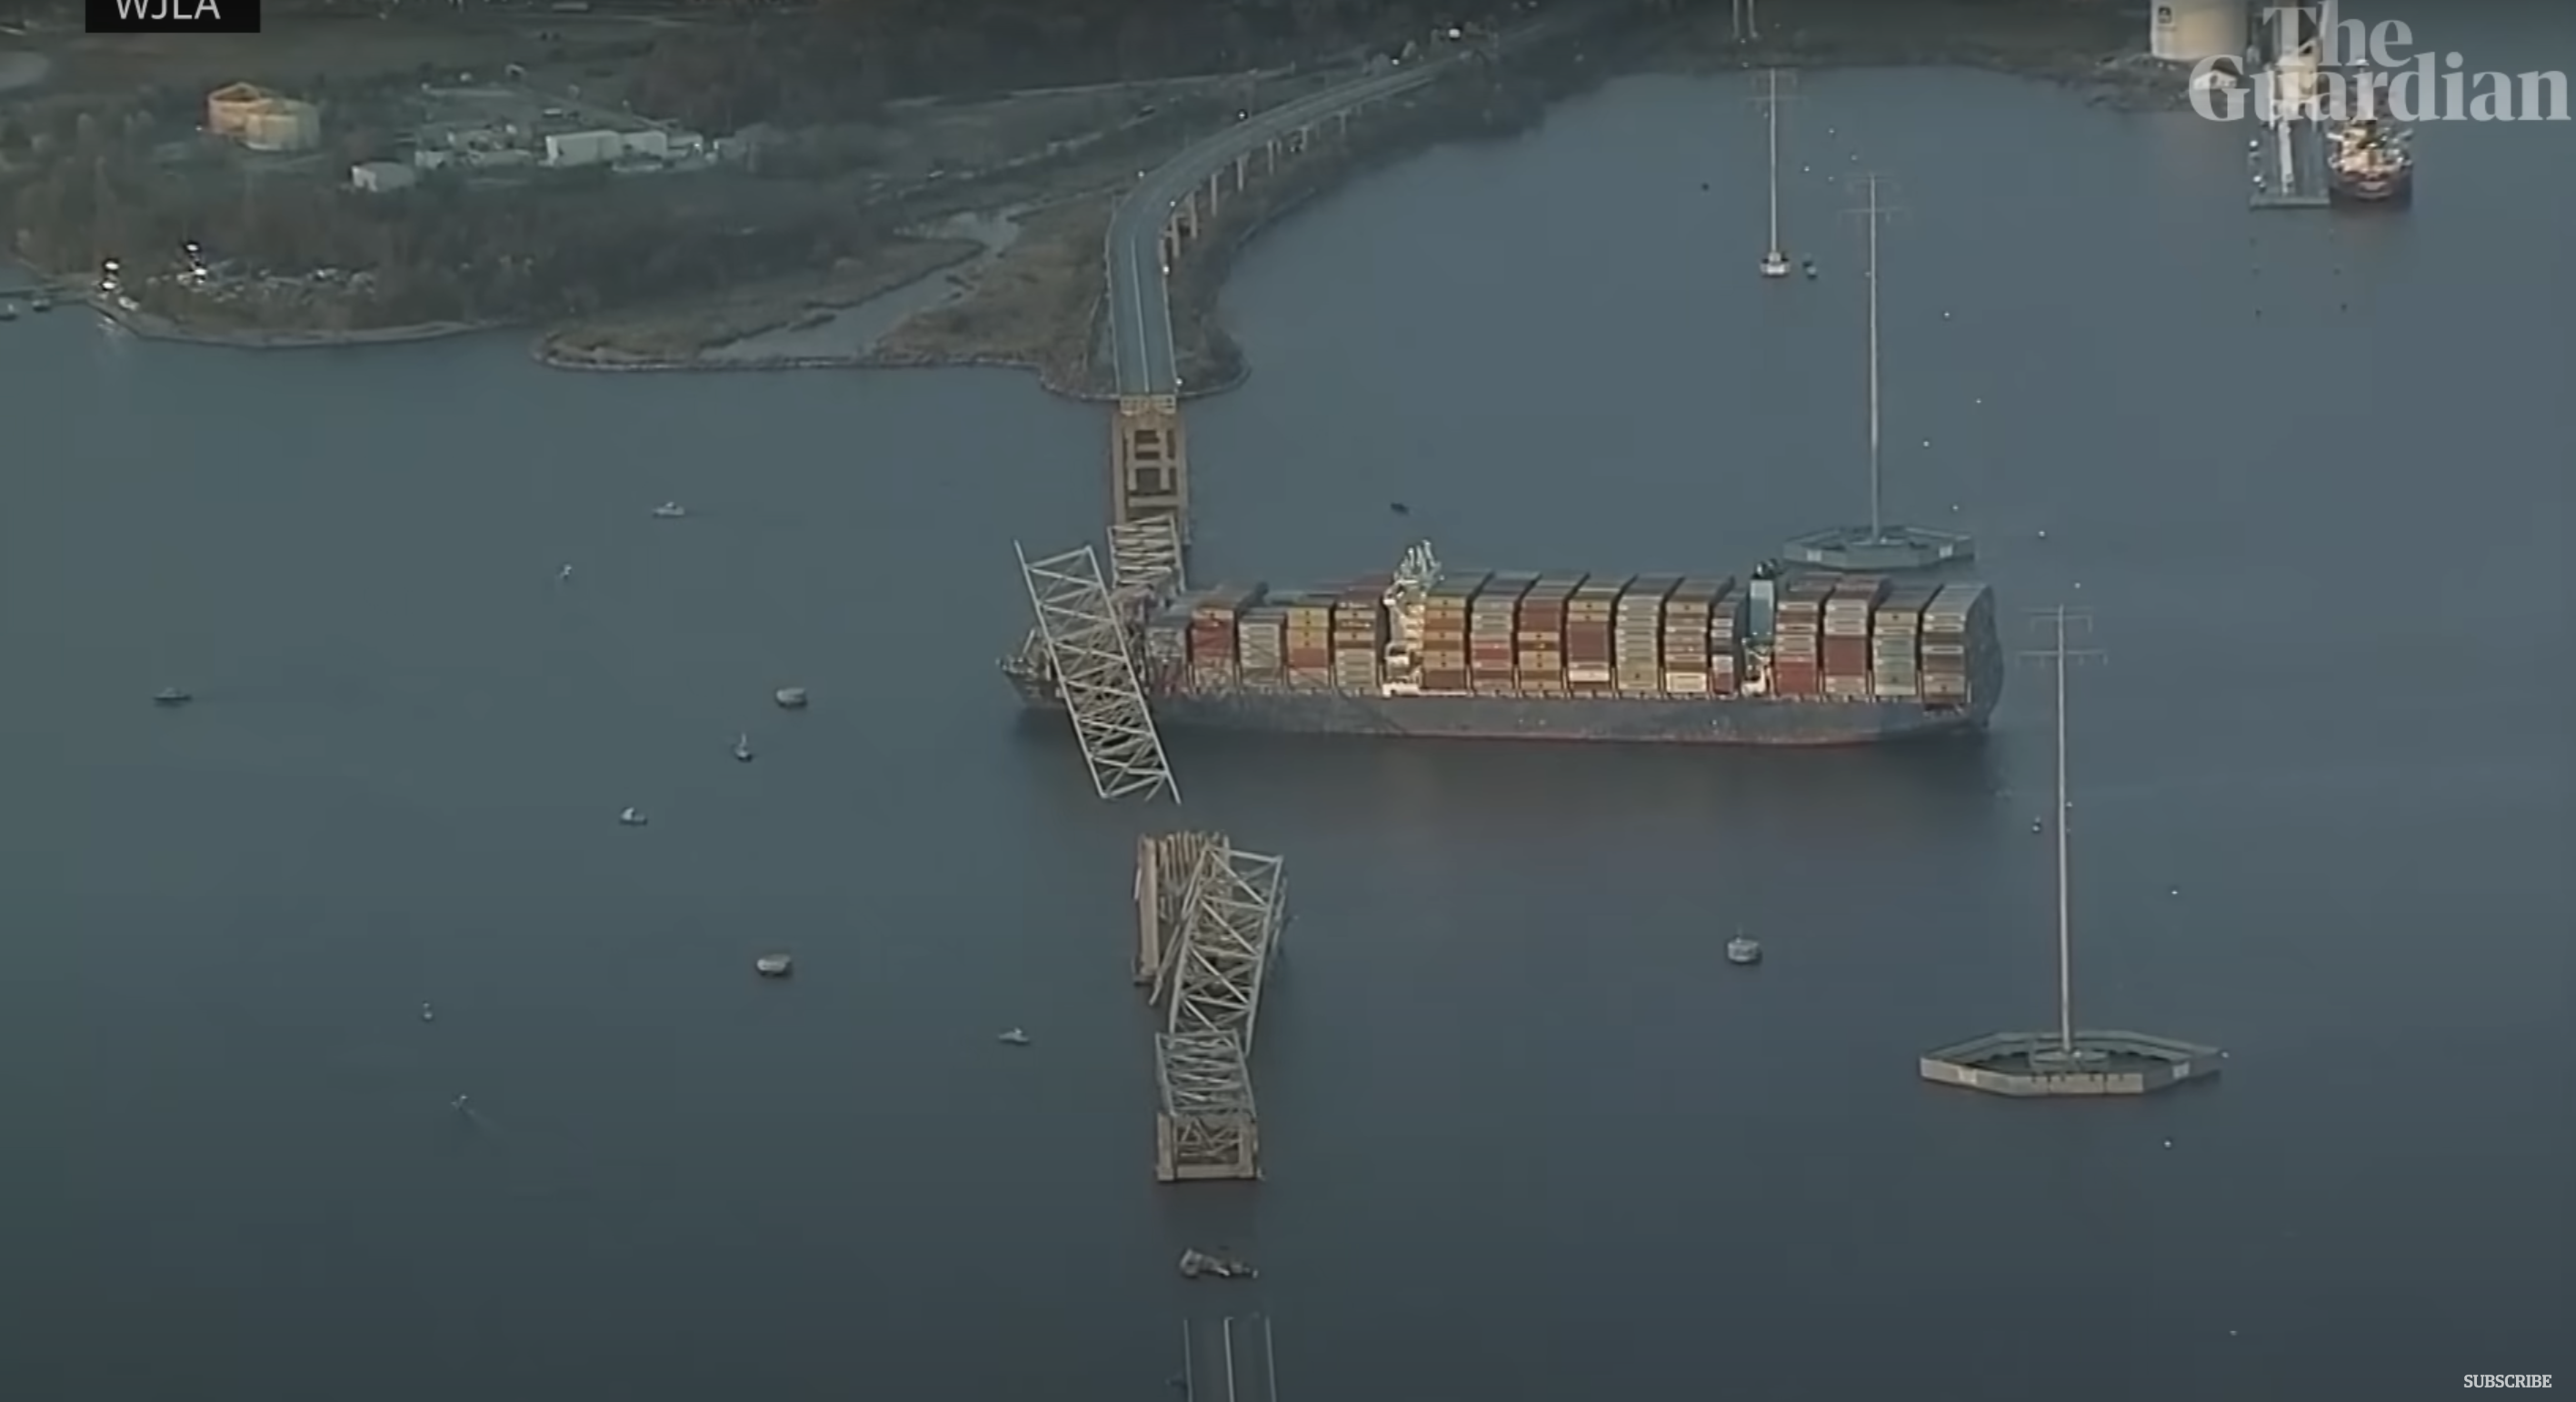 A photo of the container ship crashing into the Francis Scott Key Bridge in Baltimore, MD, as seen from a plane on March 26, 2024 | Source: YouTube/guardiannews